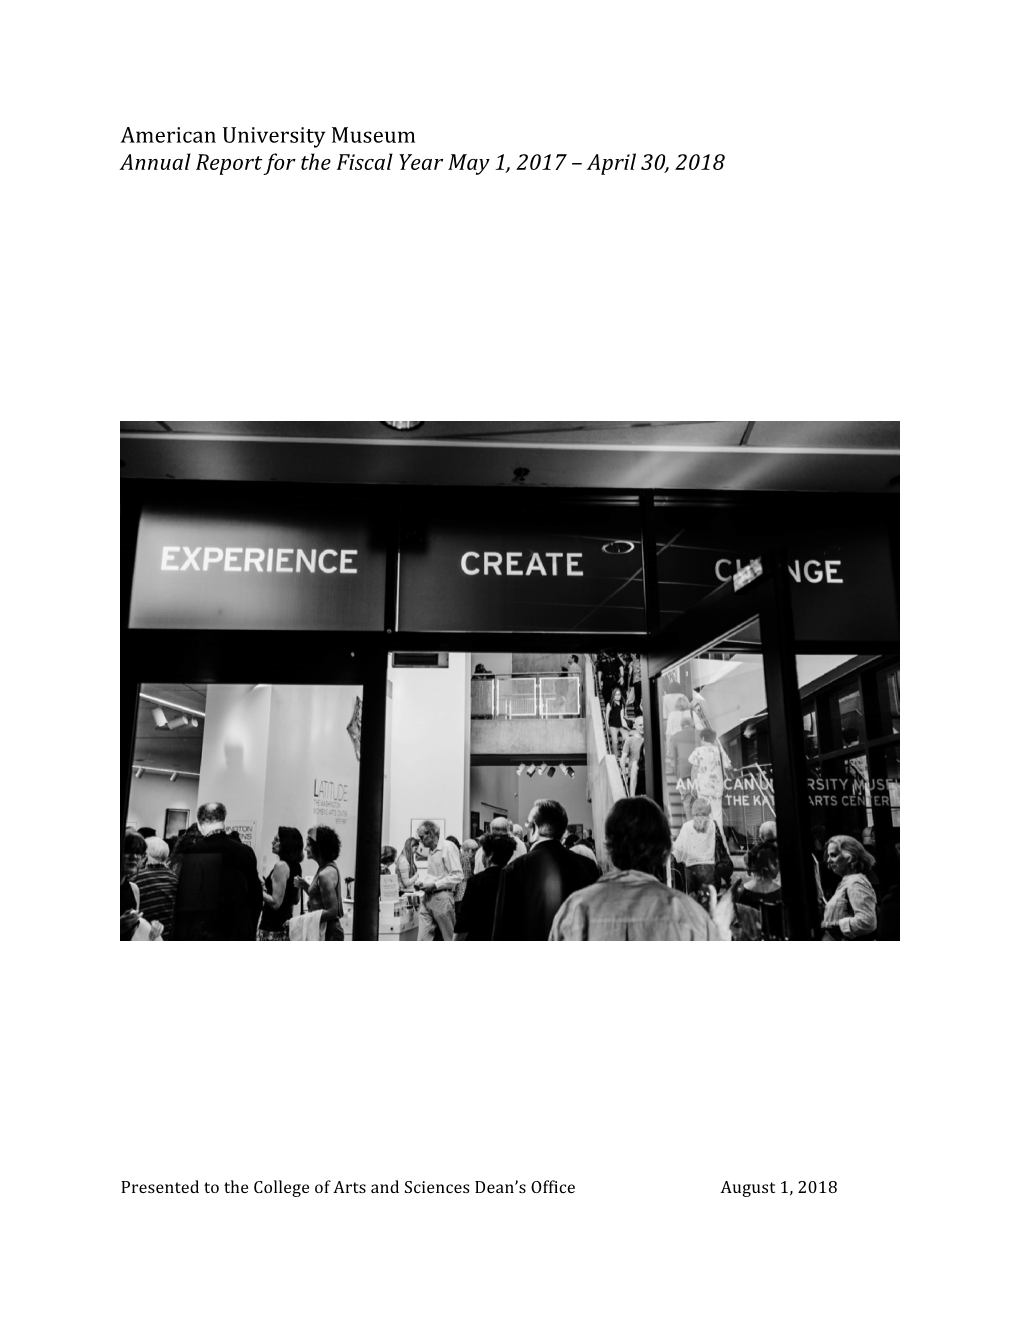 American University Museum Annual Report for the Fiscal Year May 1, 2017 – April 30, 2018